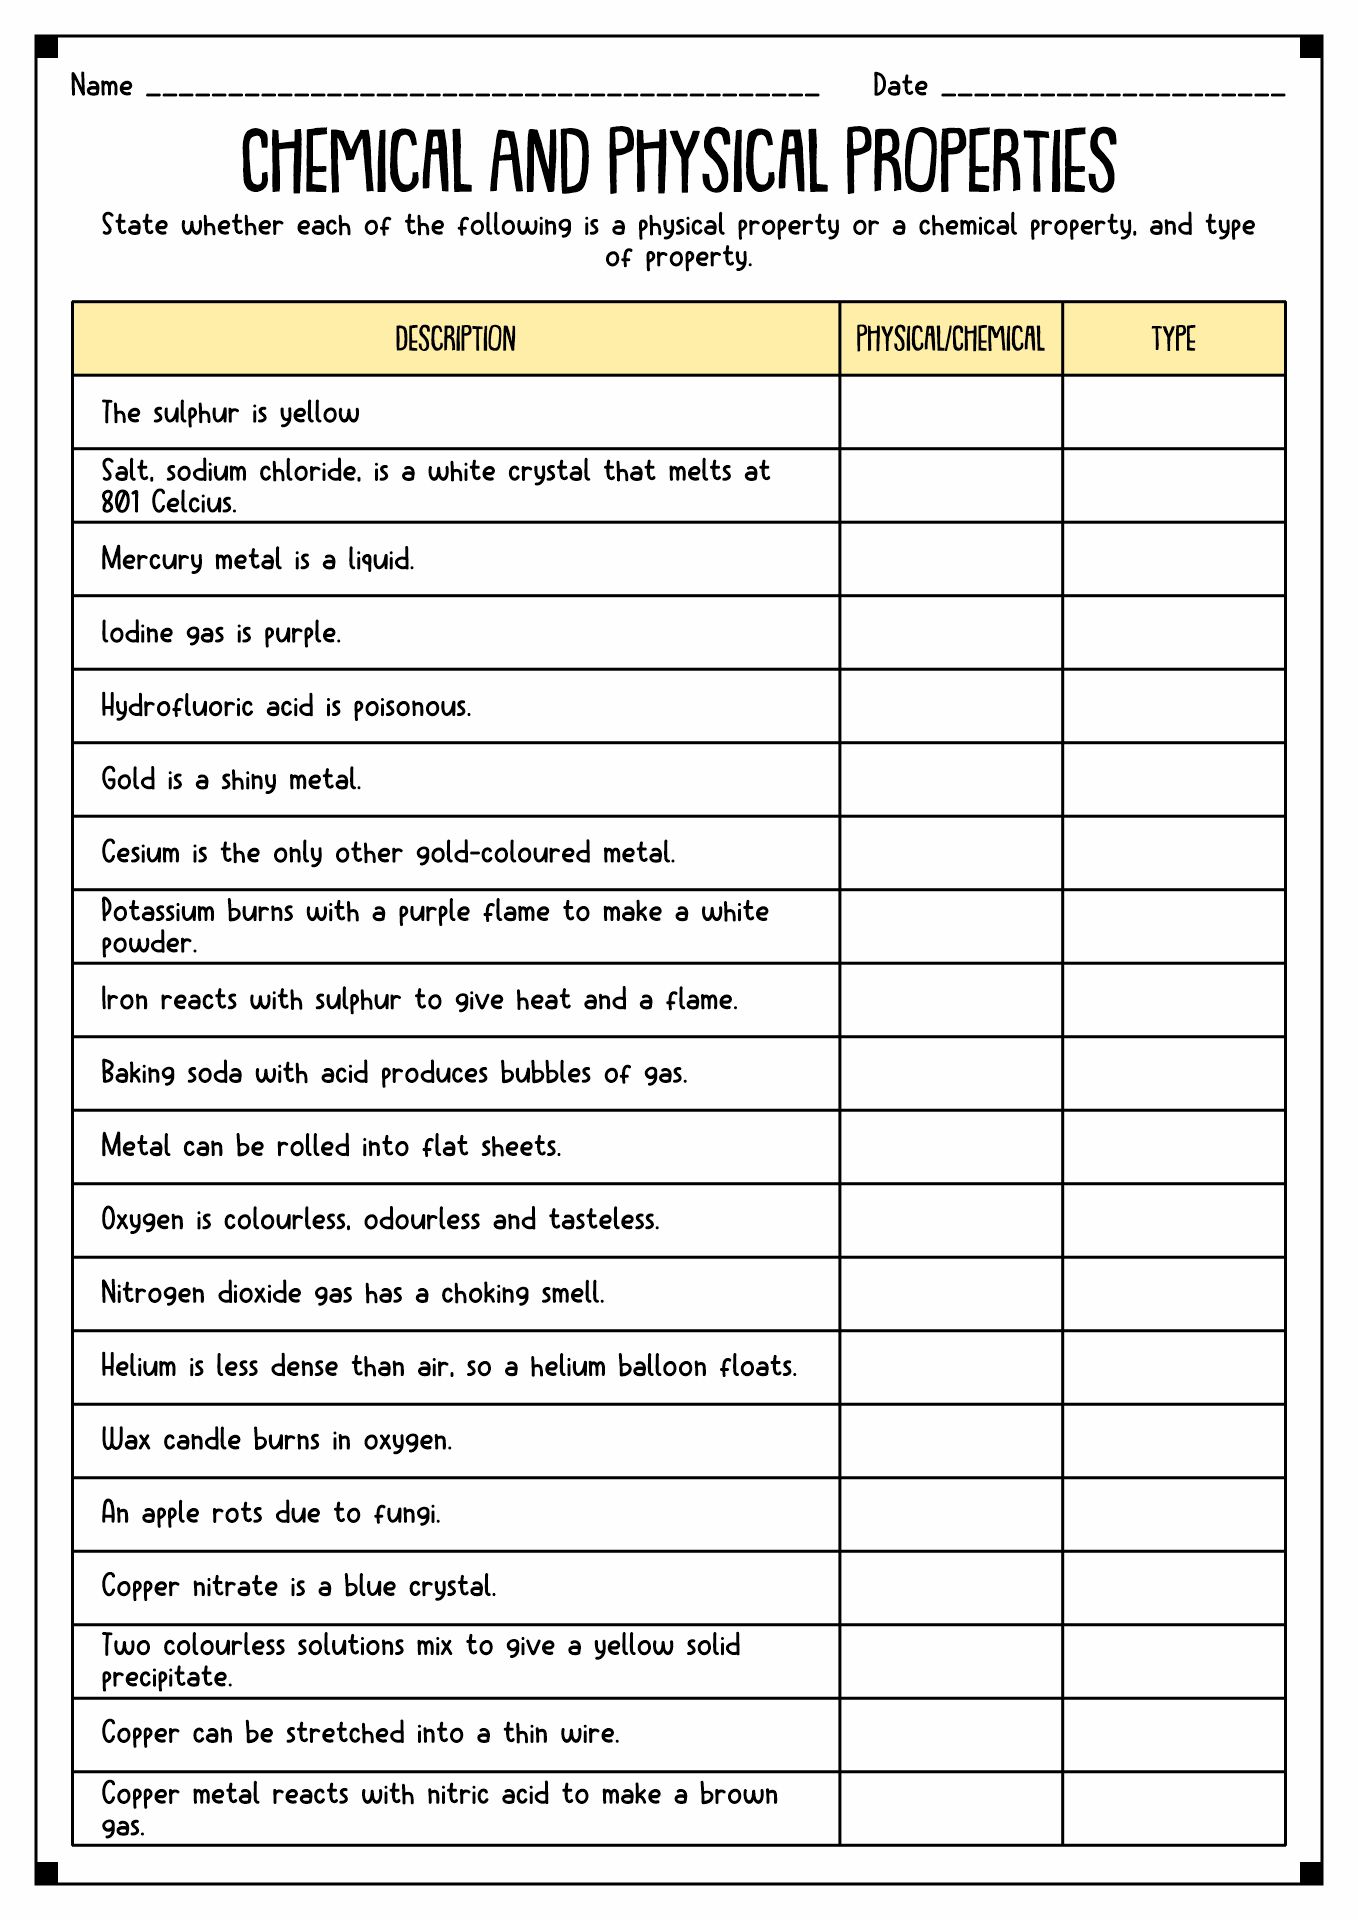 physical-and-chemical-properties-worksheet-free-download-gambr-co